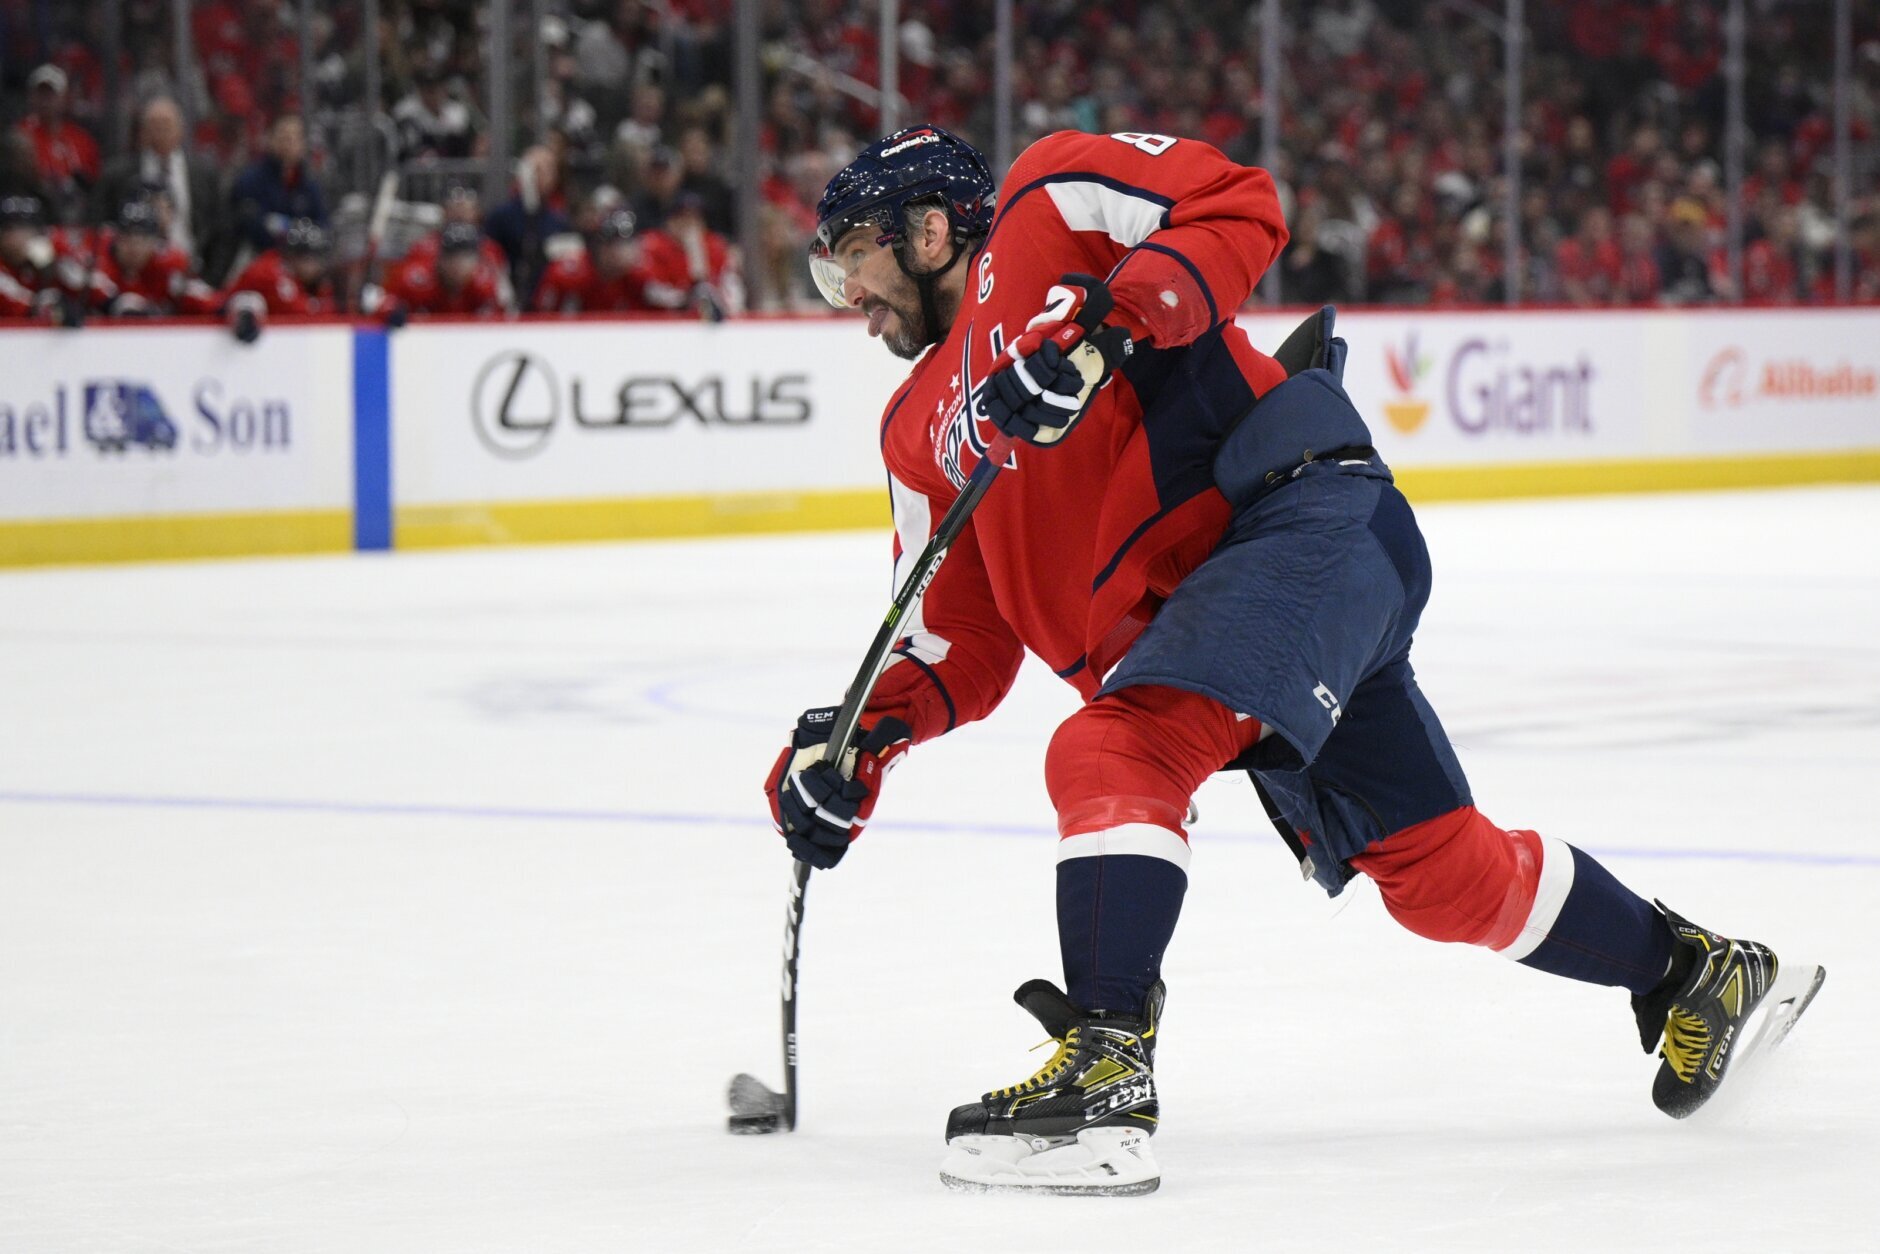 Capitals' 5-foot 7, 140-pound Matthew Phillips tops the list of